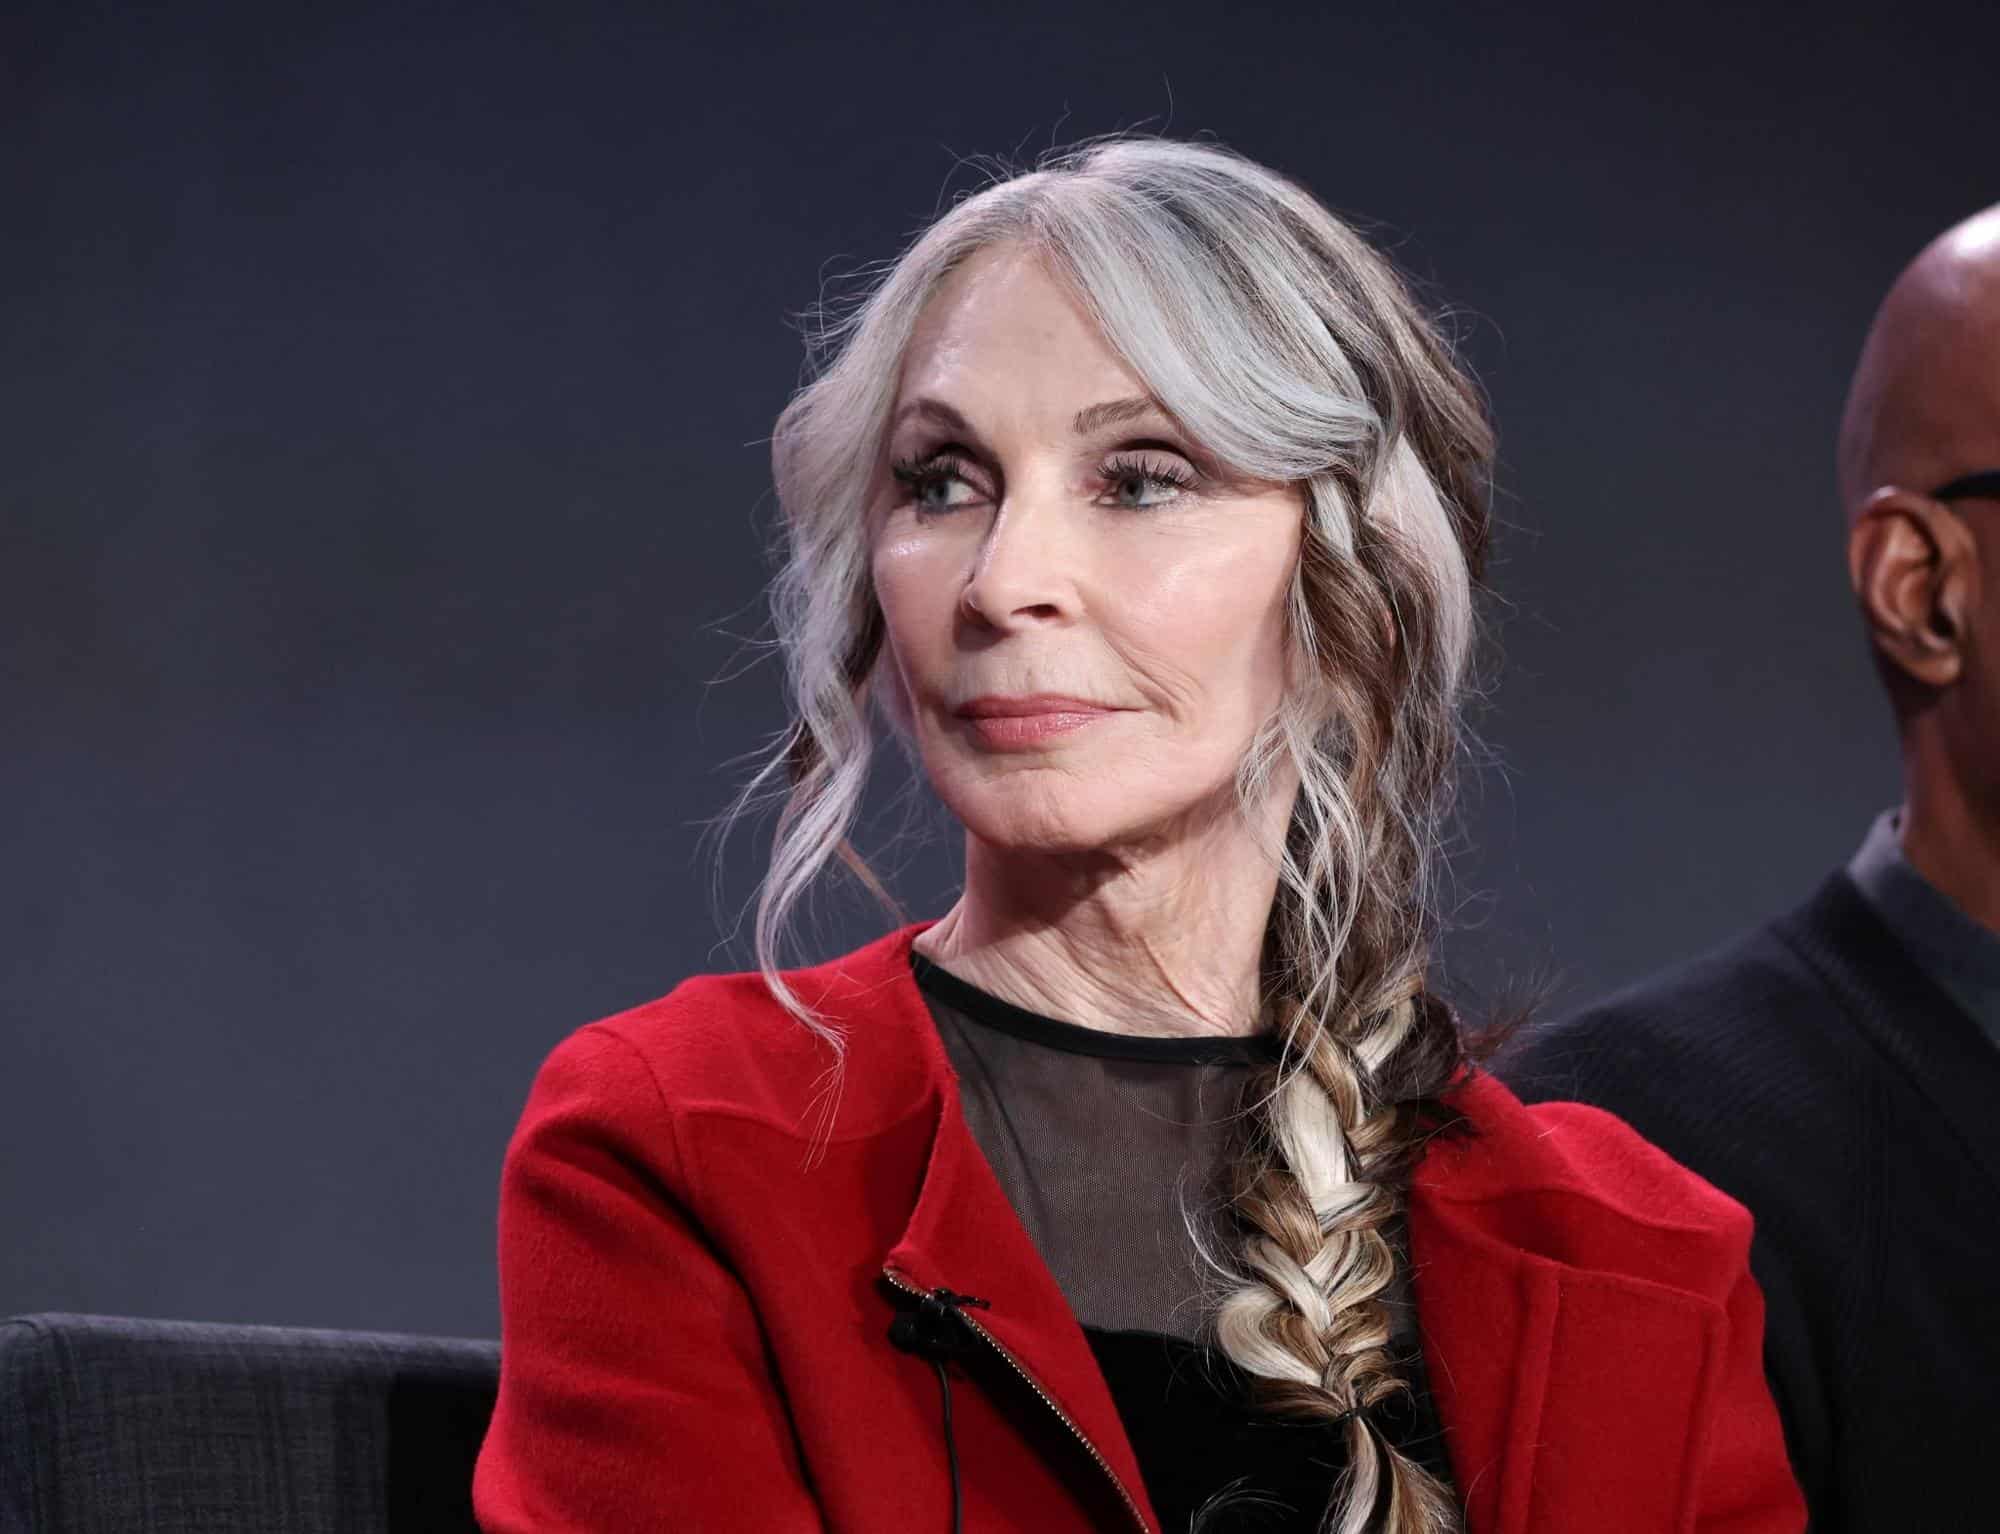 Gates Mcfadden on why she was temporarily fired from Star Trek and her concerns regarding female characters on set.